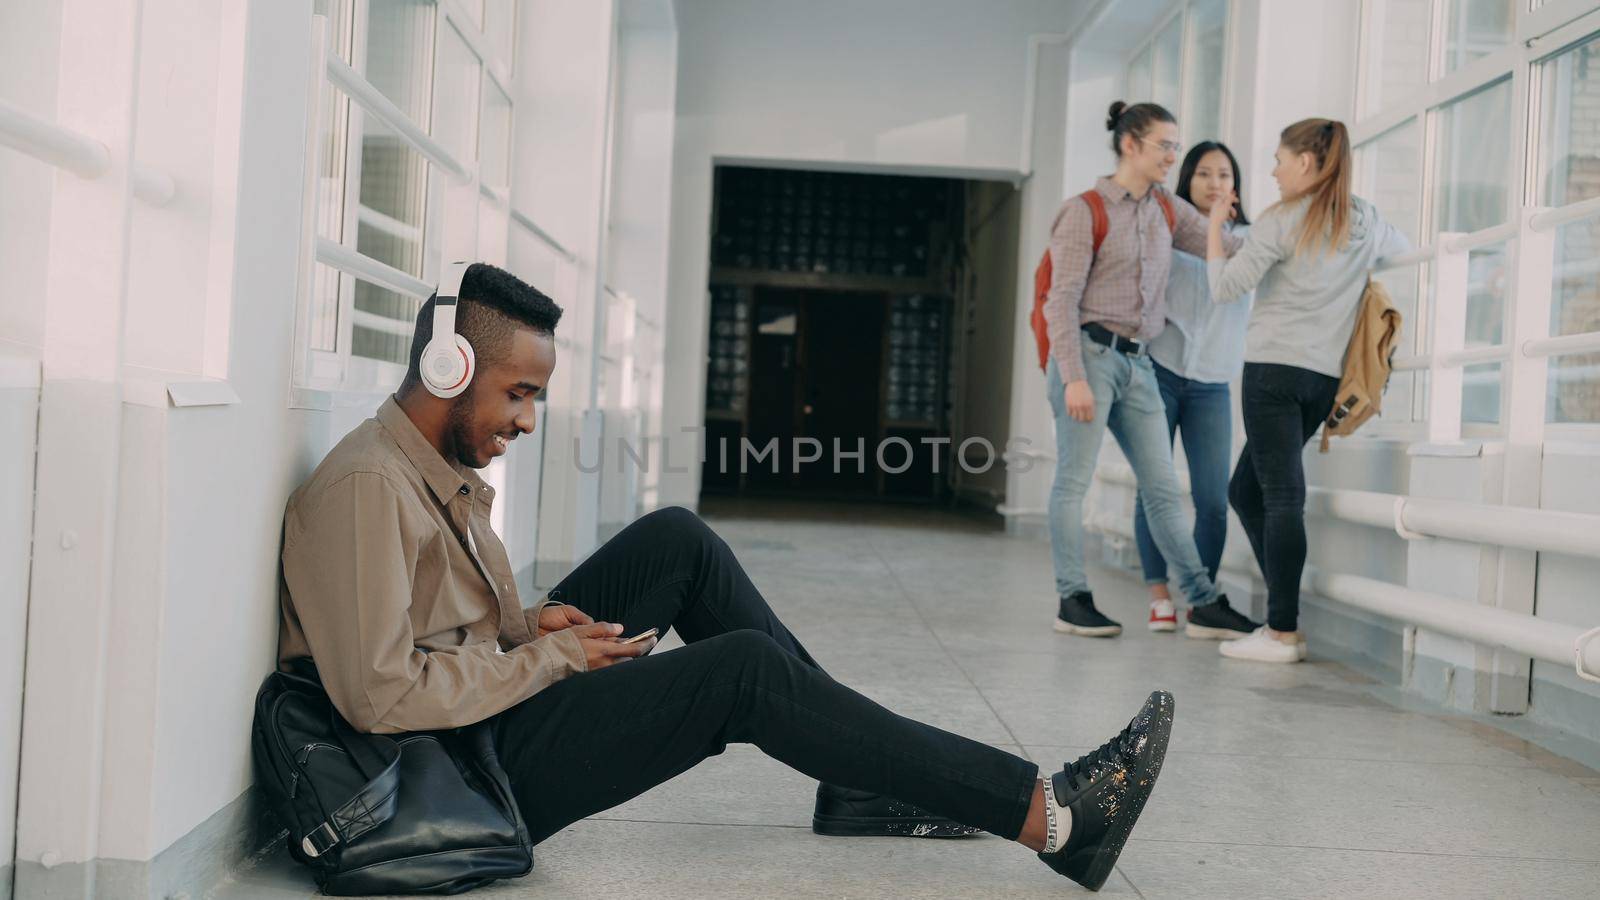 Young handsome african american male student sitting on floor in white corridor with headphones on head listening to music holding smartphone texting someone. His classmates are behind him